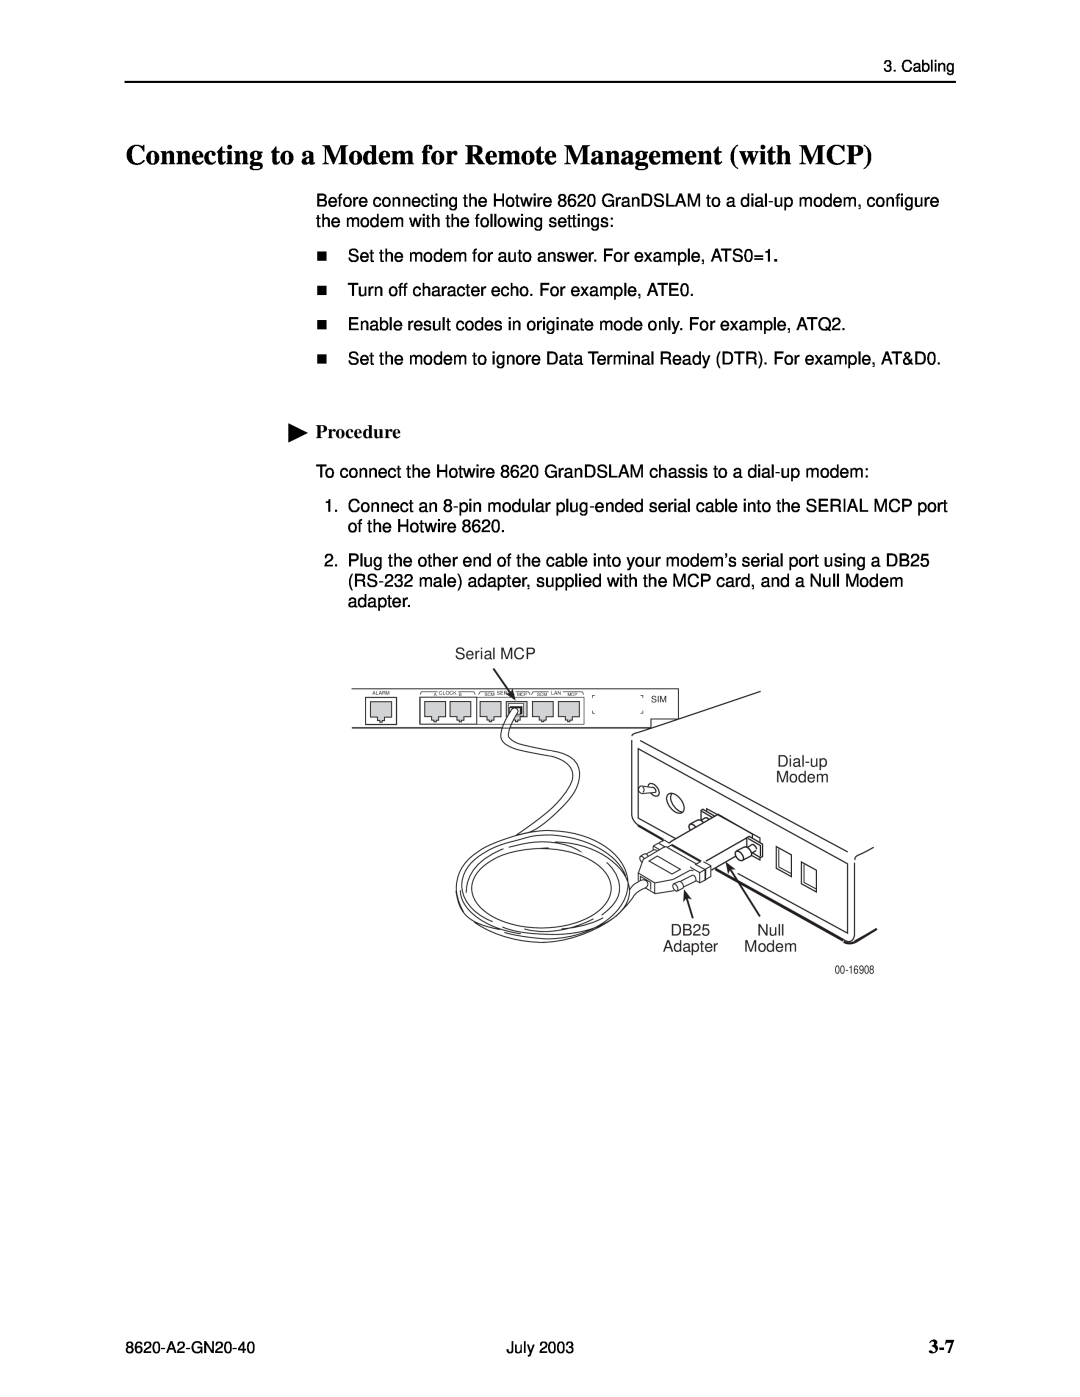 Paradyne Hotwire 8620 GranDSLAM Installation Guide manual Connecting to a Modem for Remote Management with MCP, Procedure 